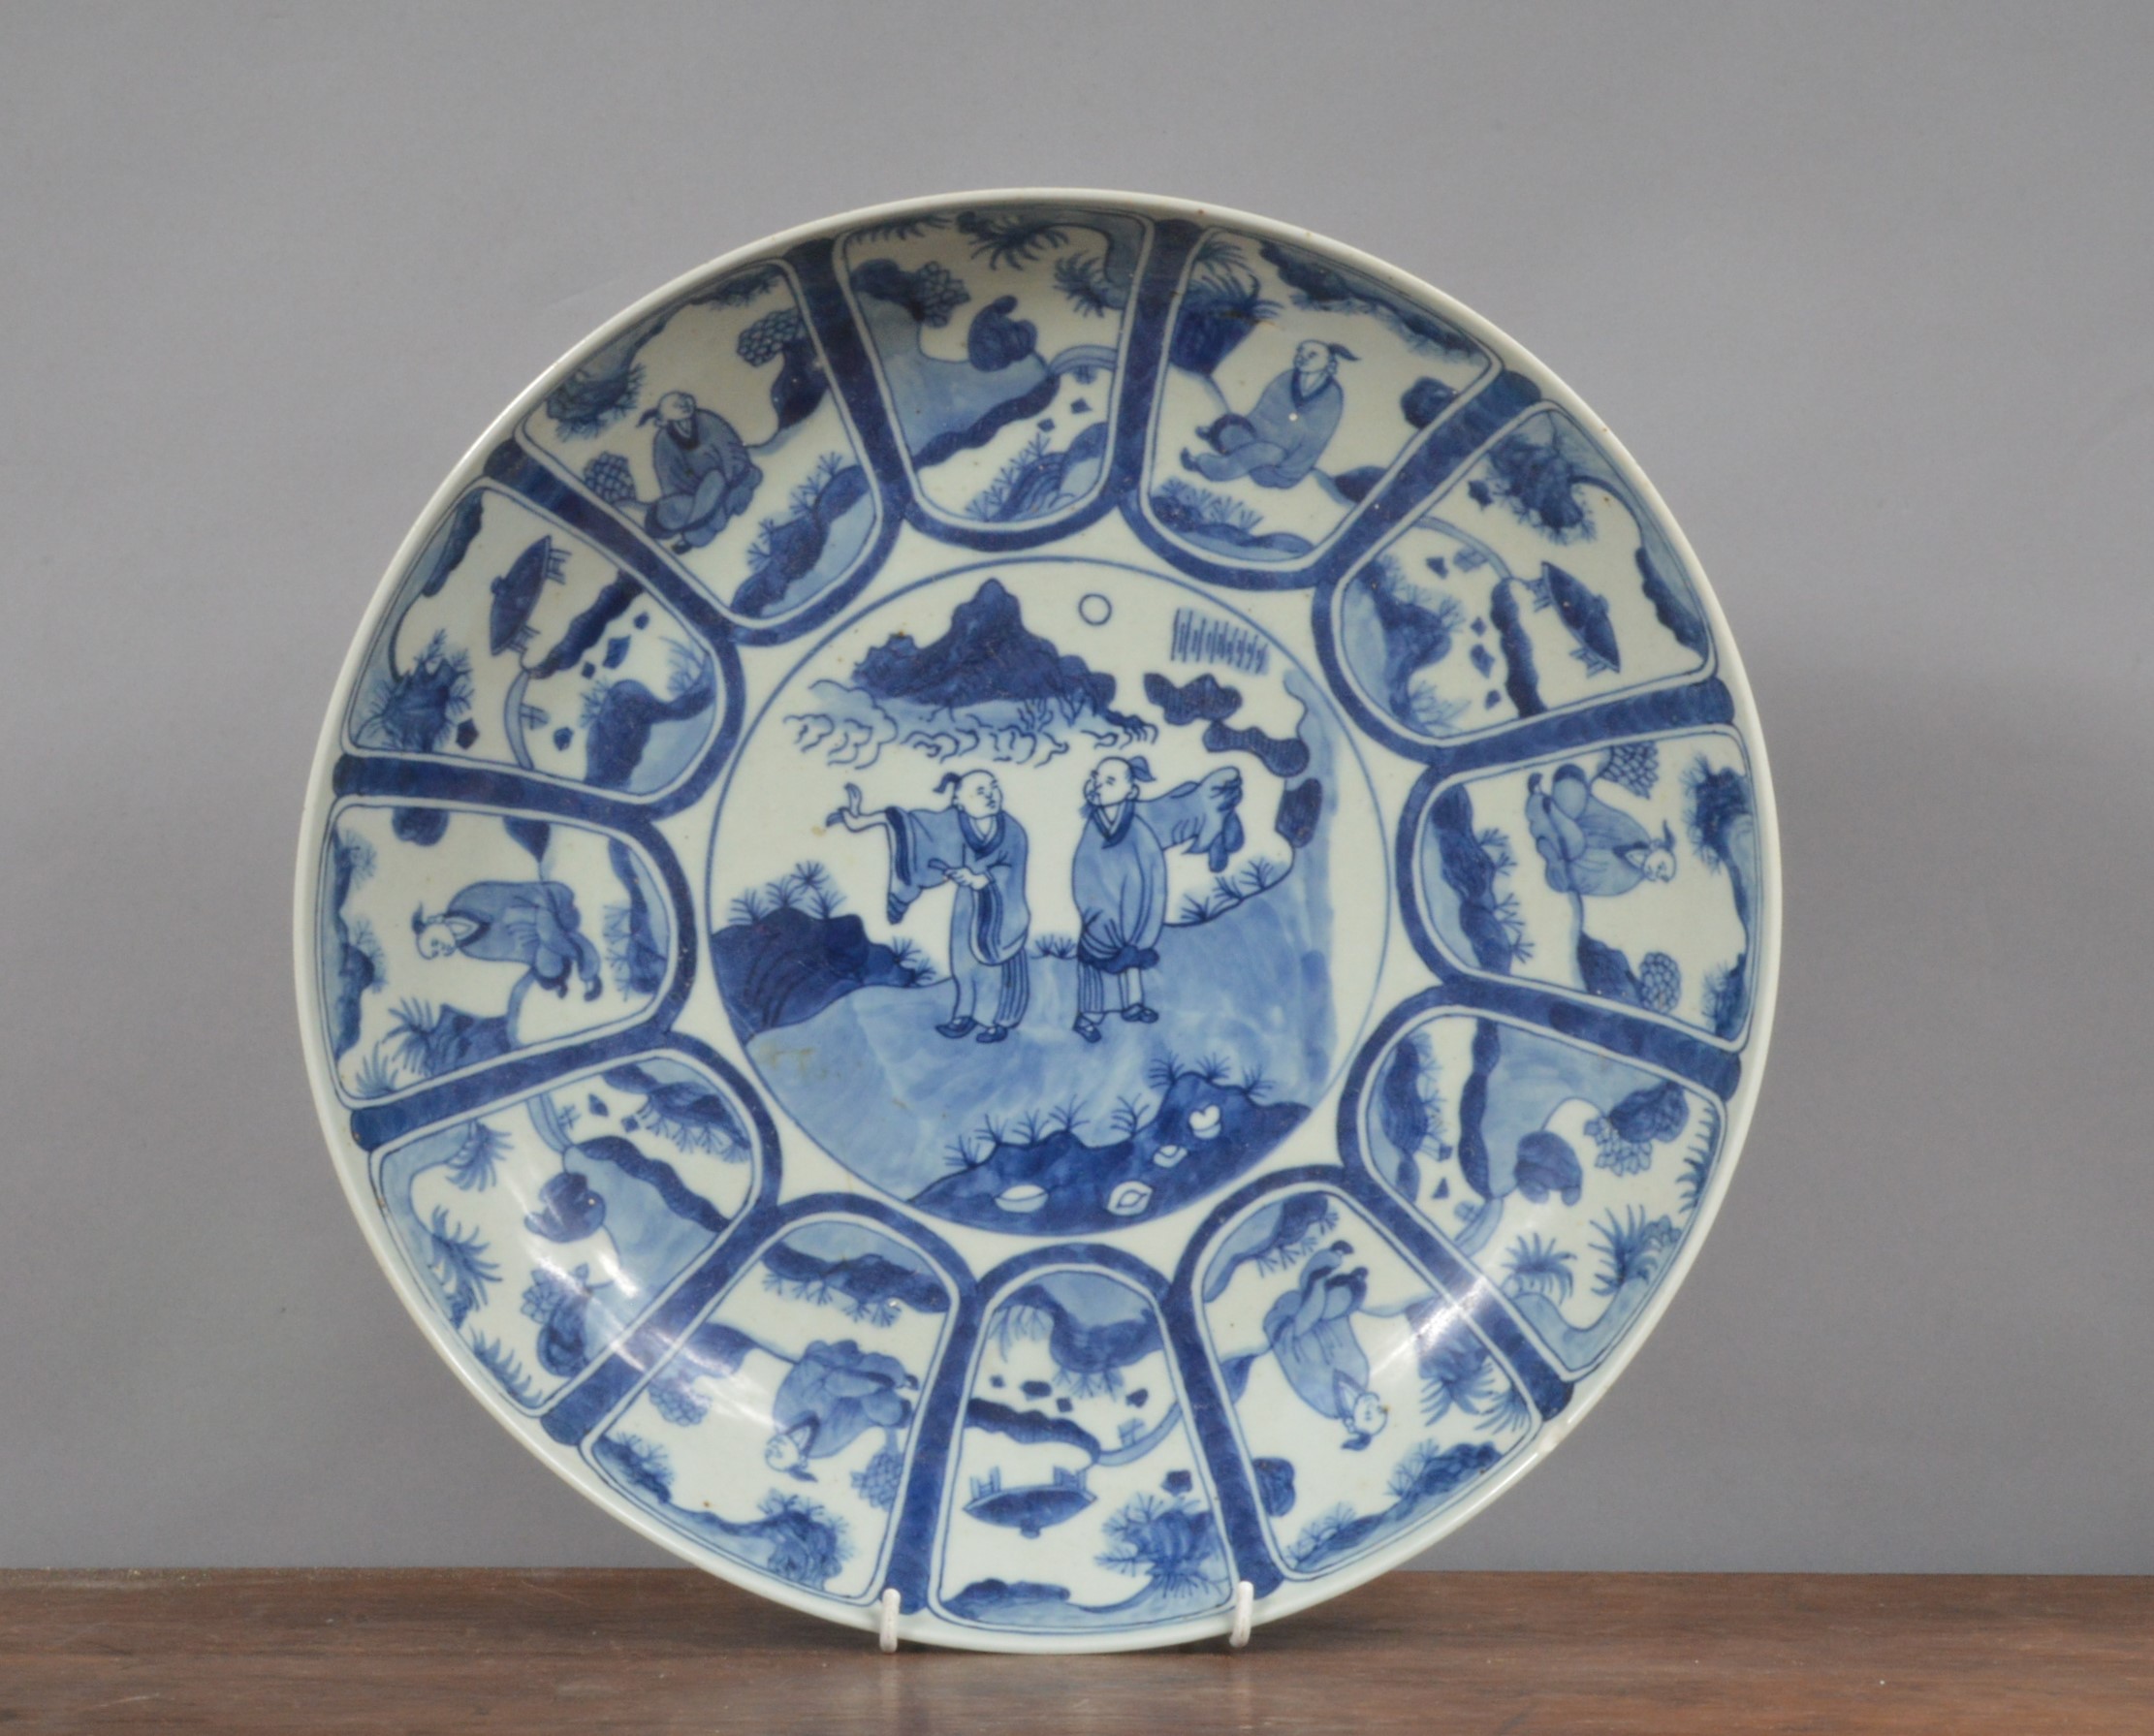 A 19th century Chinese blue and white hand-painted large charger, decorated with a central scene